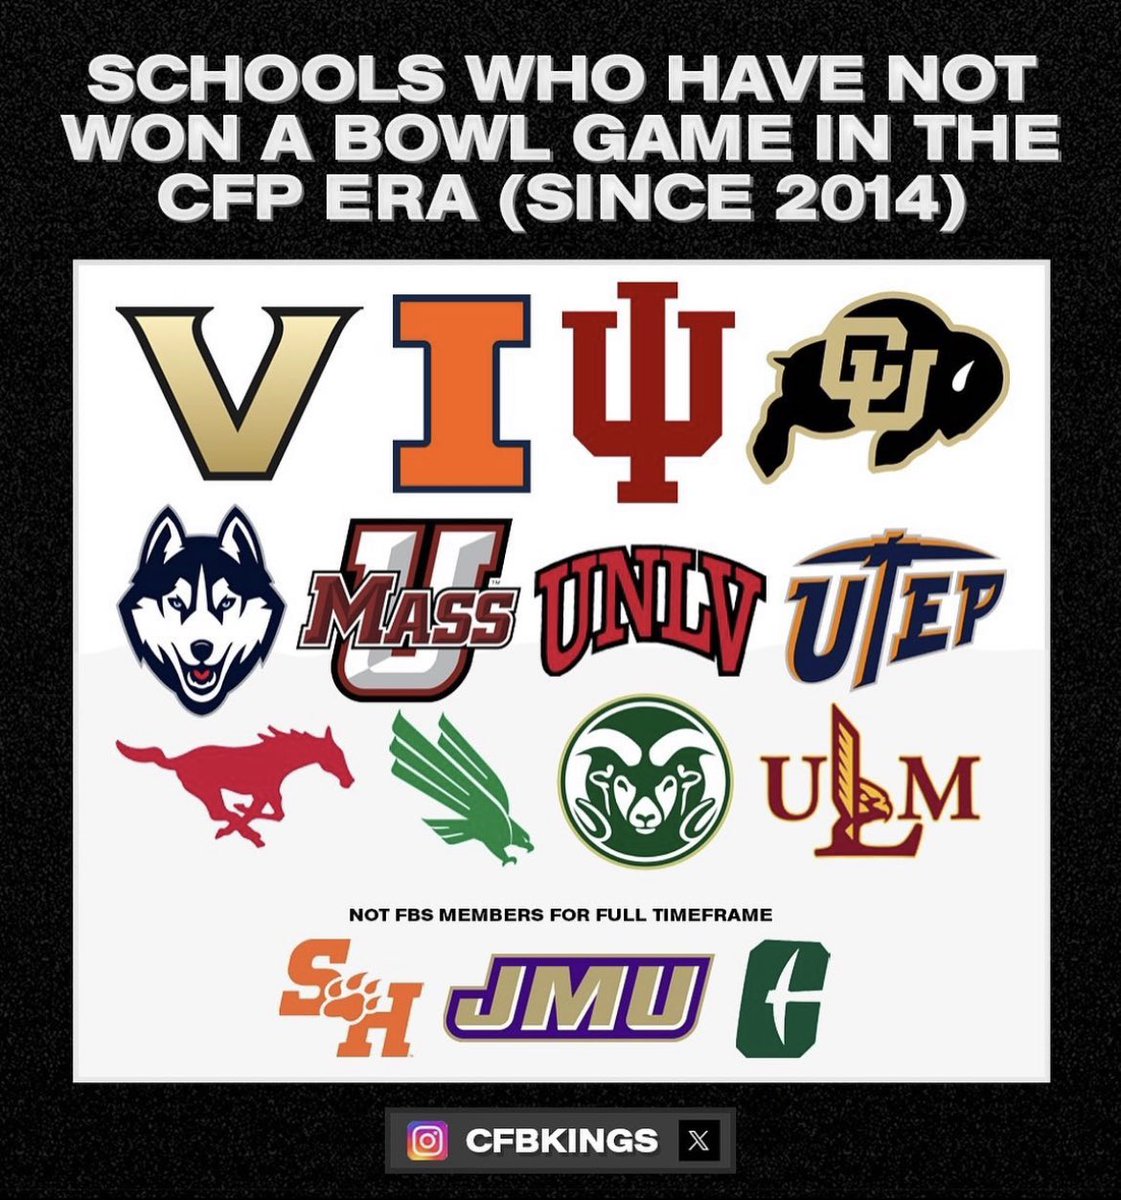 Schools who haven’t won a bowl game in the CFP era (since 2014) 🚫🥣